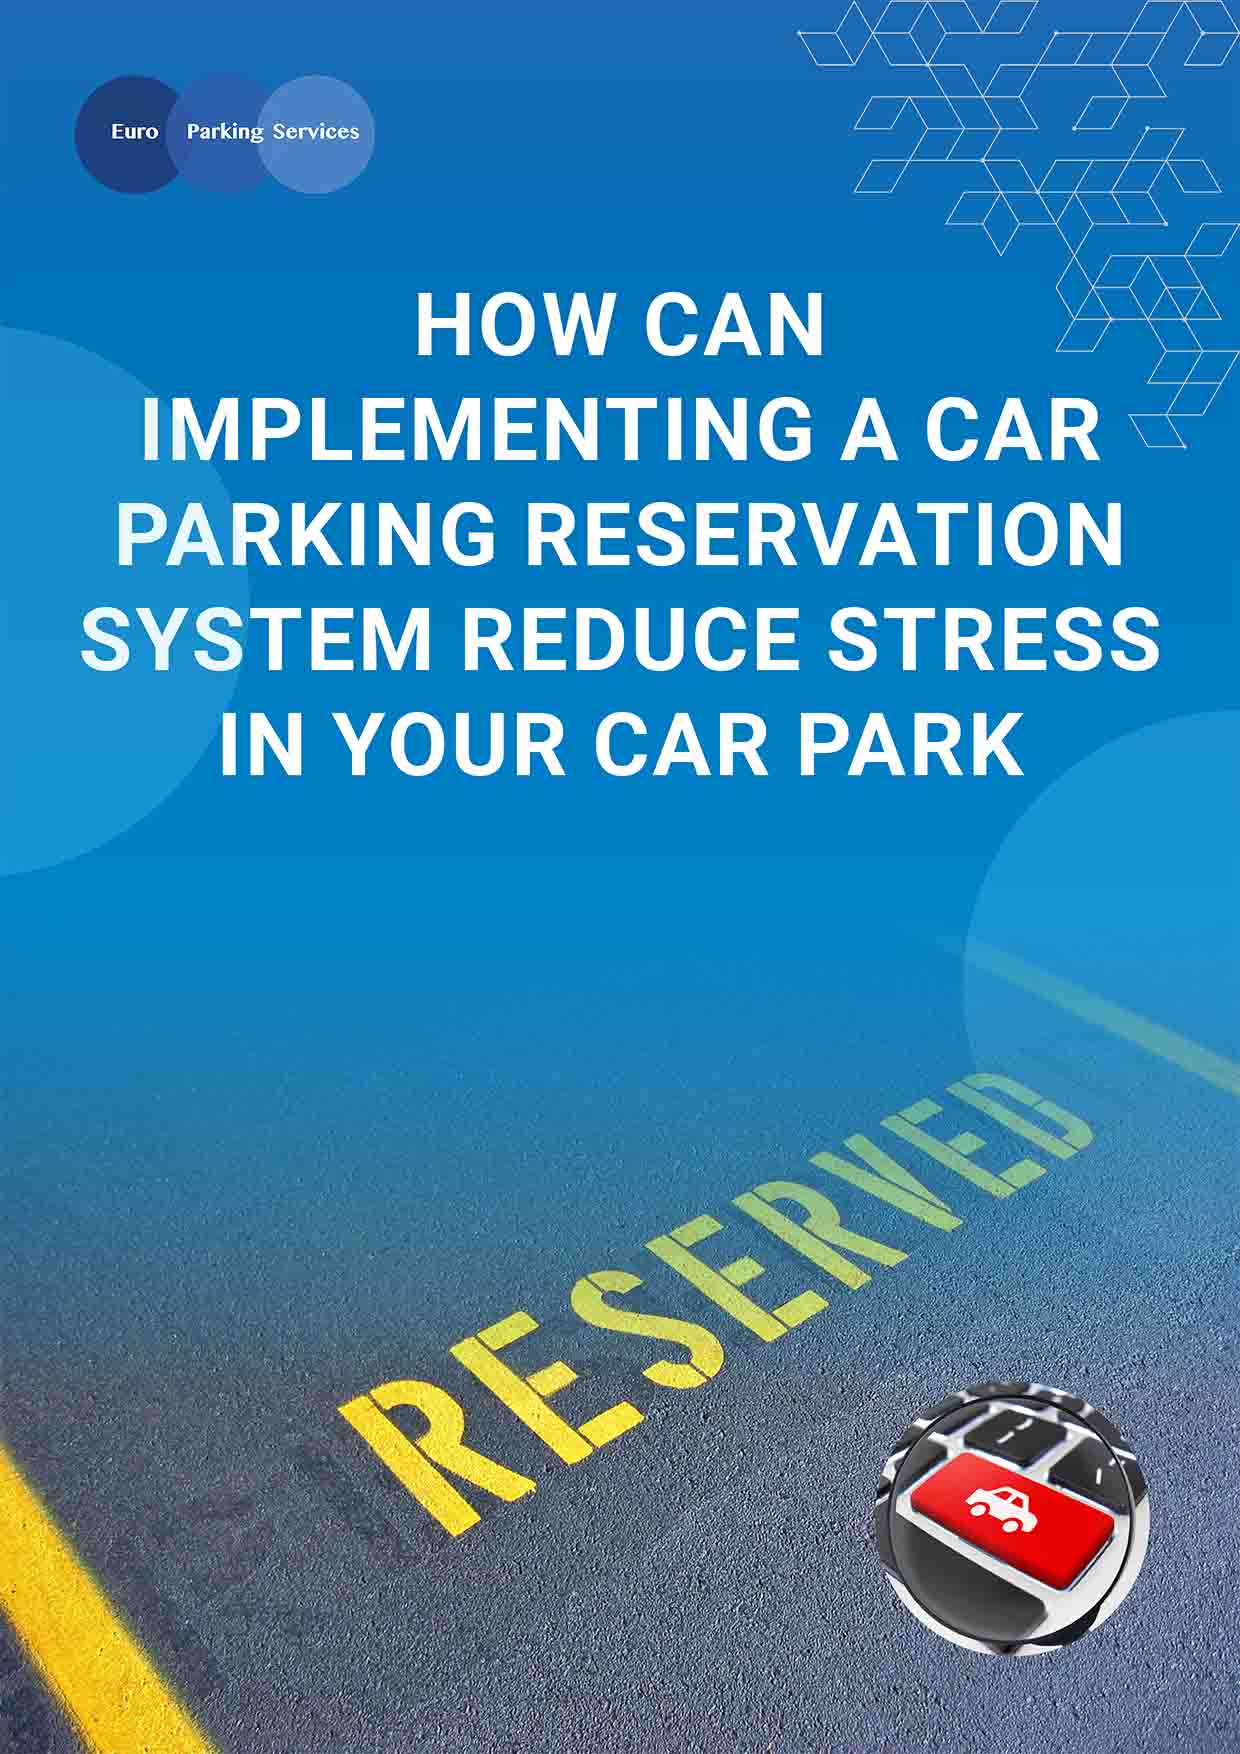 How Can Implementing a Car Parking Reservation System Reduce Stress in Your Car Park